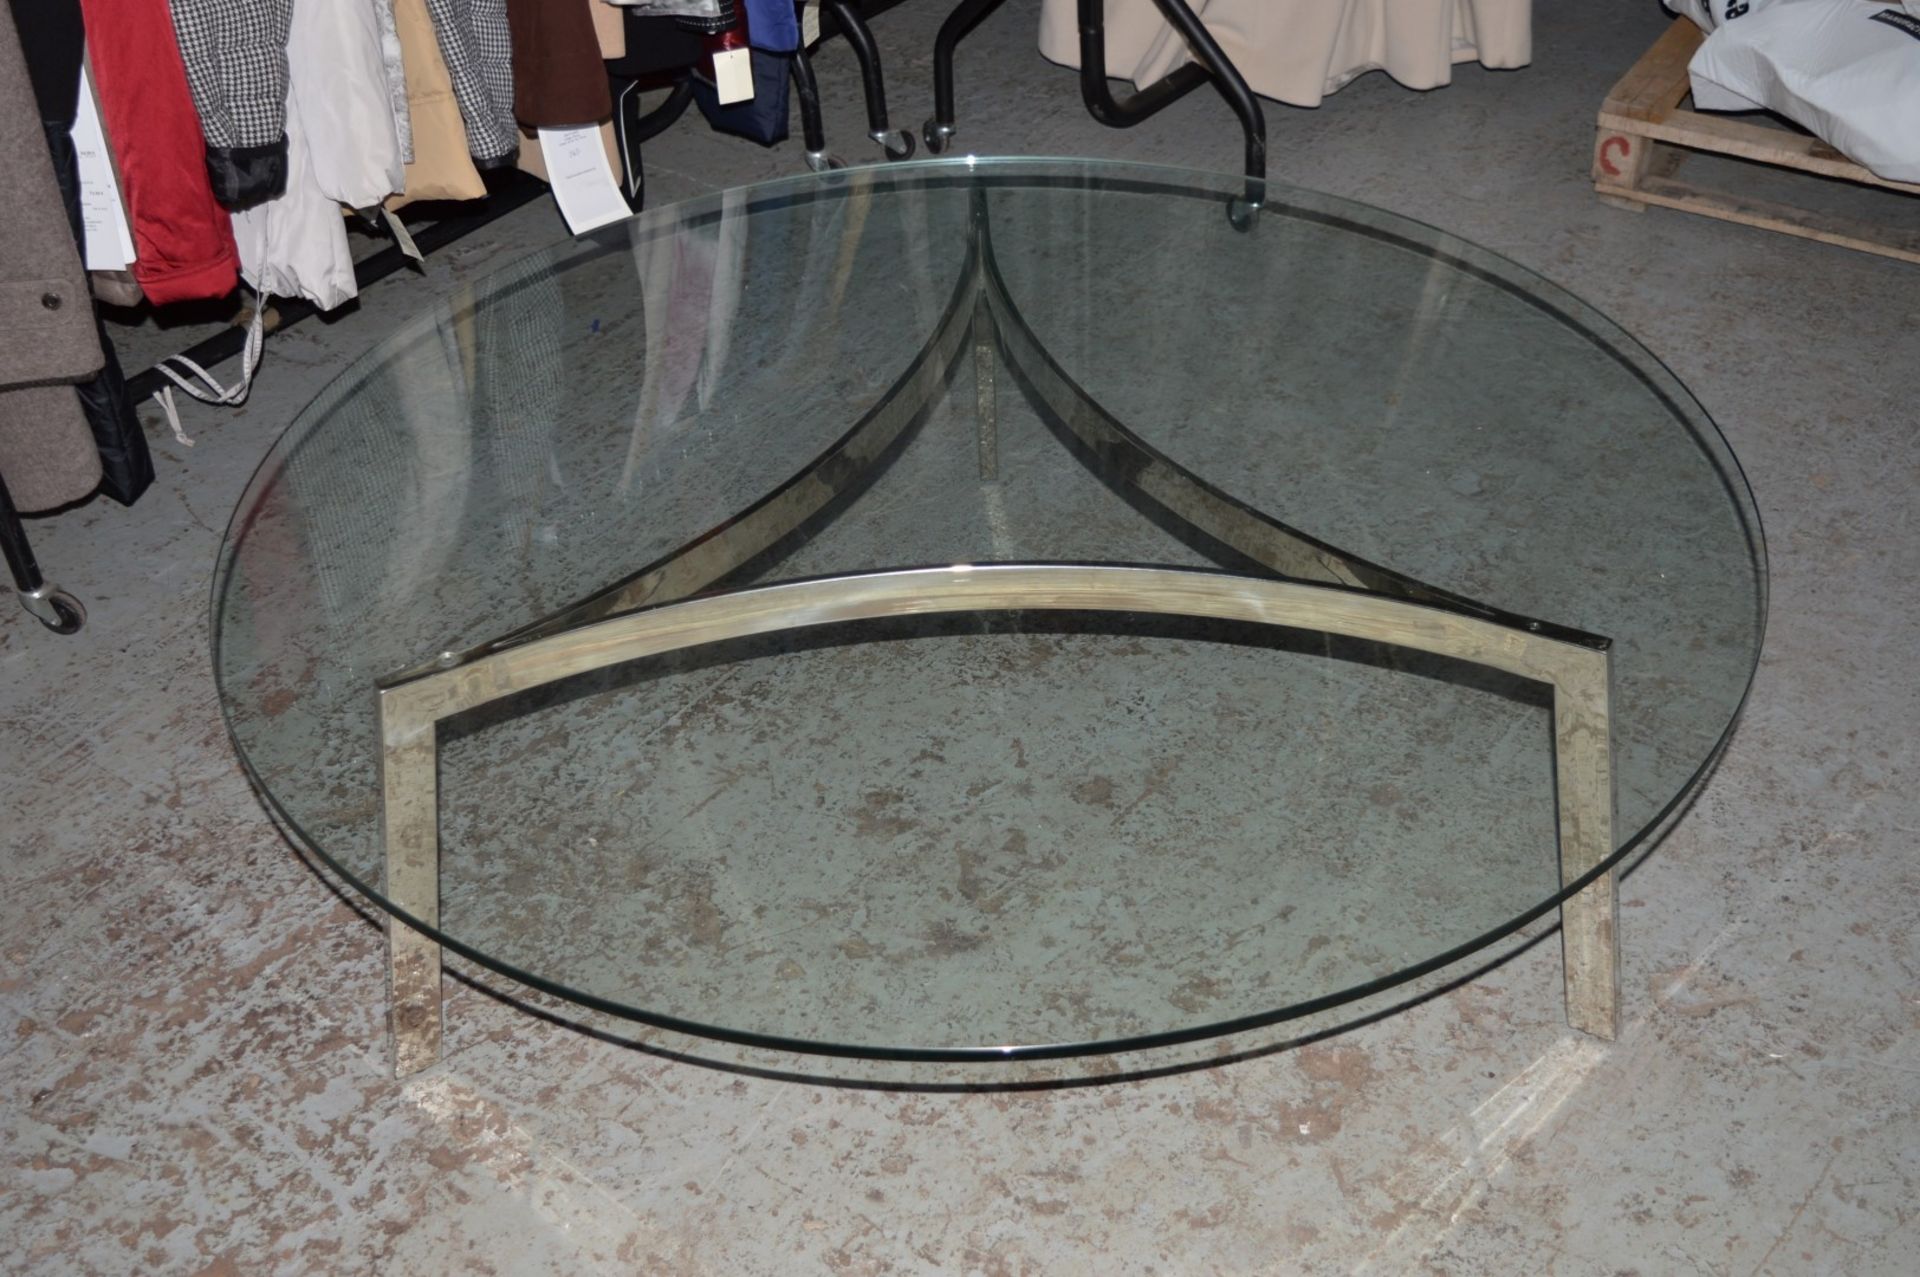 1 x Designer Chelsom Coffee Table - Chrome Frame With Tempered Glass Circular Glass Top - CL011 -